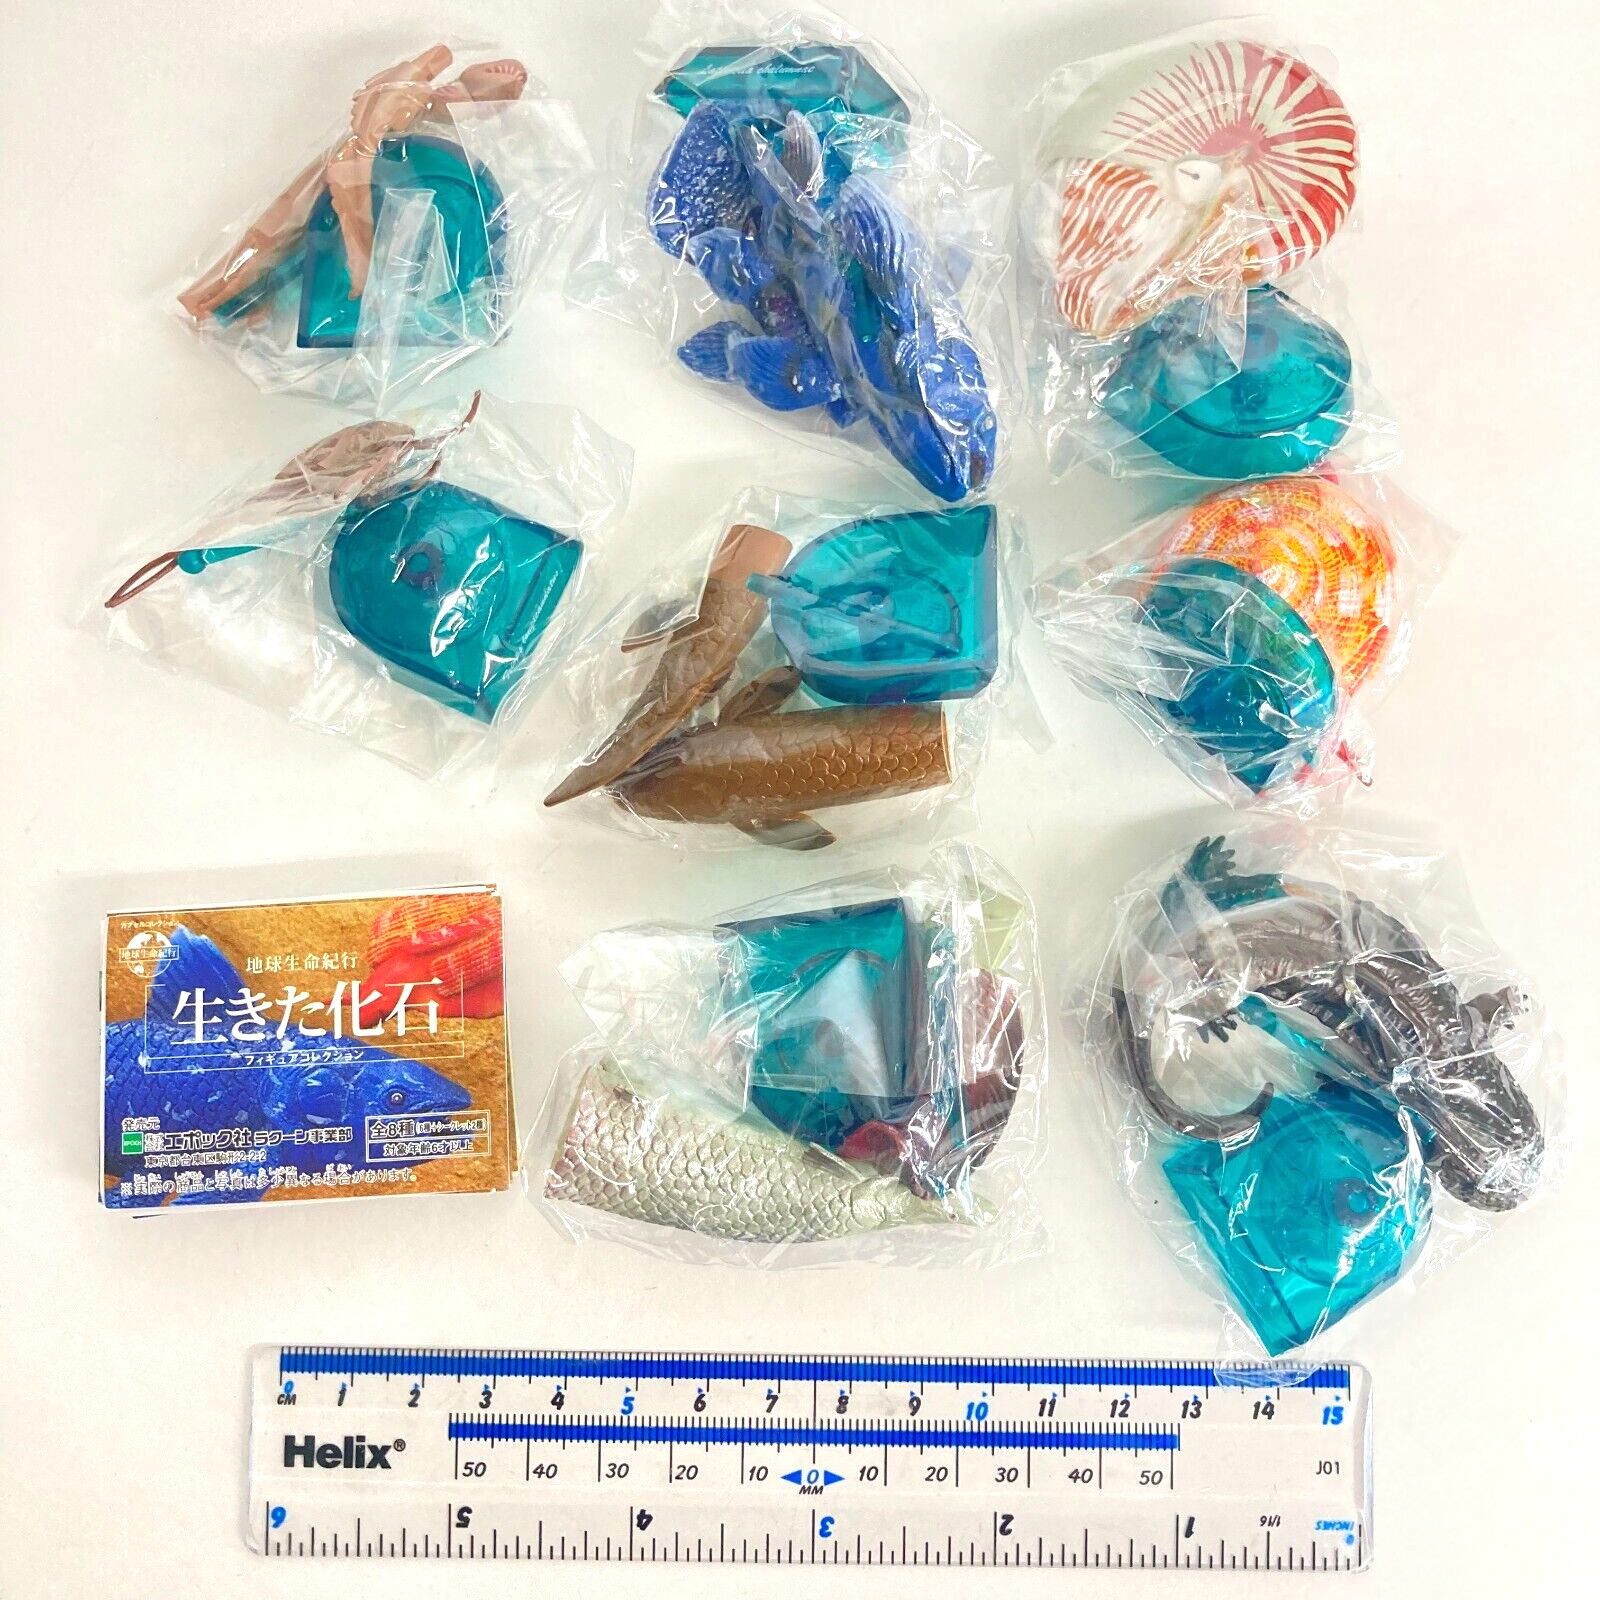 Epoch Living Fossil Mini Figure Collection Set of 8 pcs 2003 Japan coelacanth